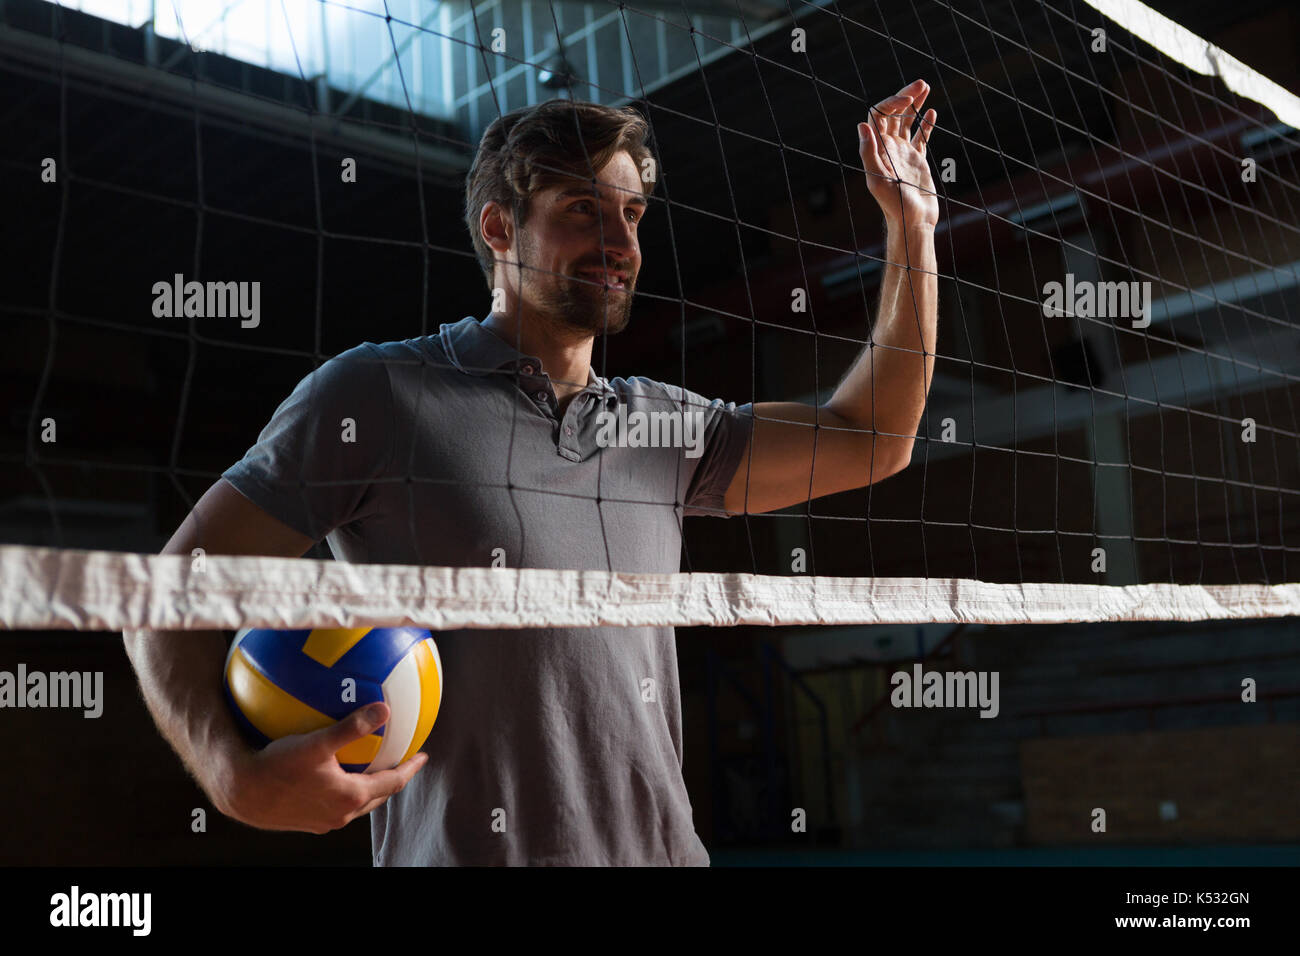 Male player with volleyball looking away at court Stock Photo